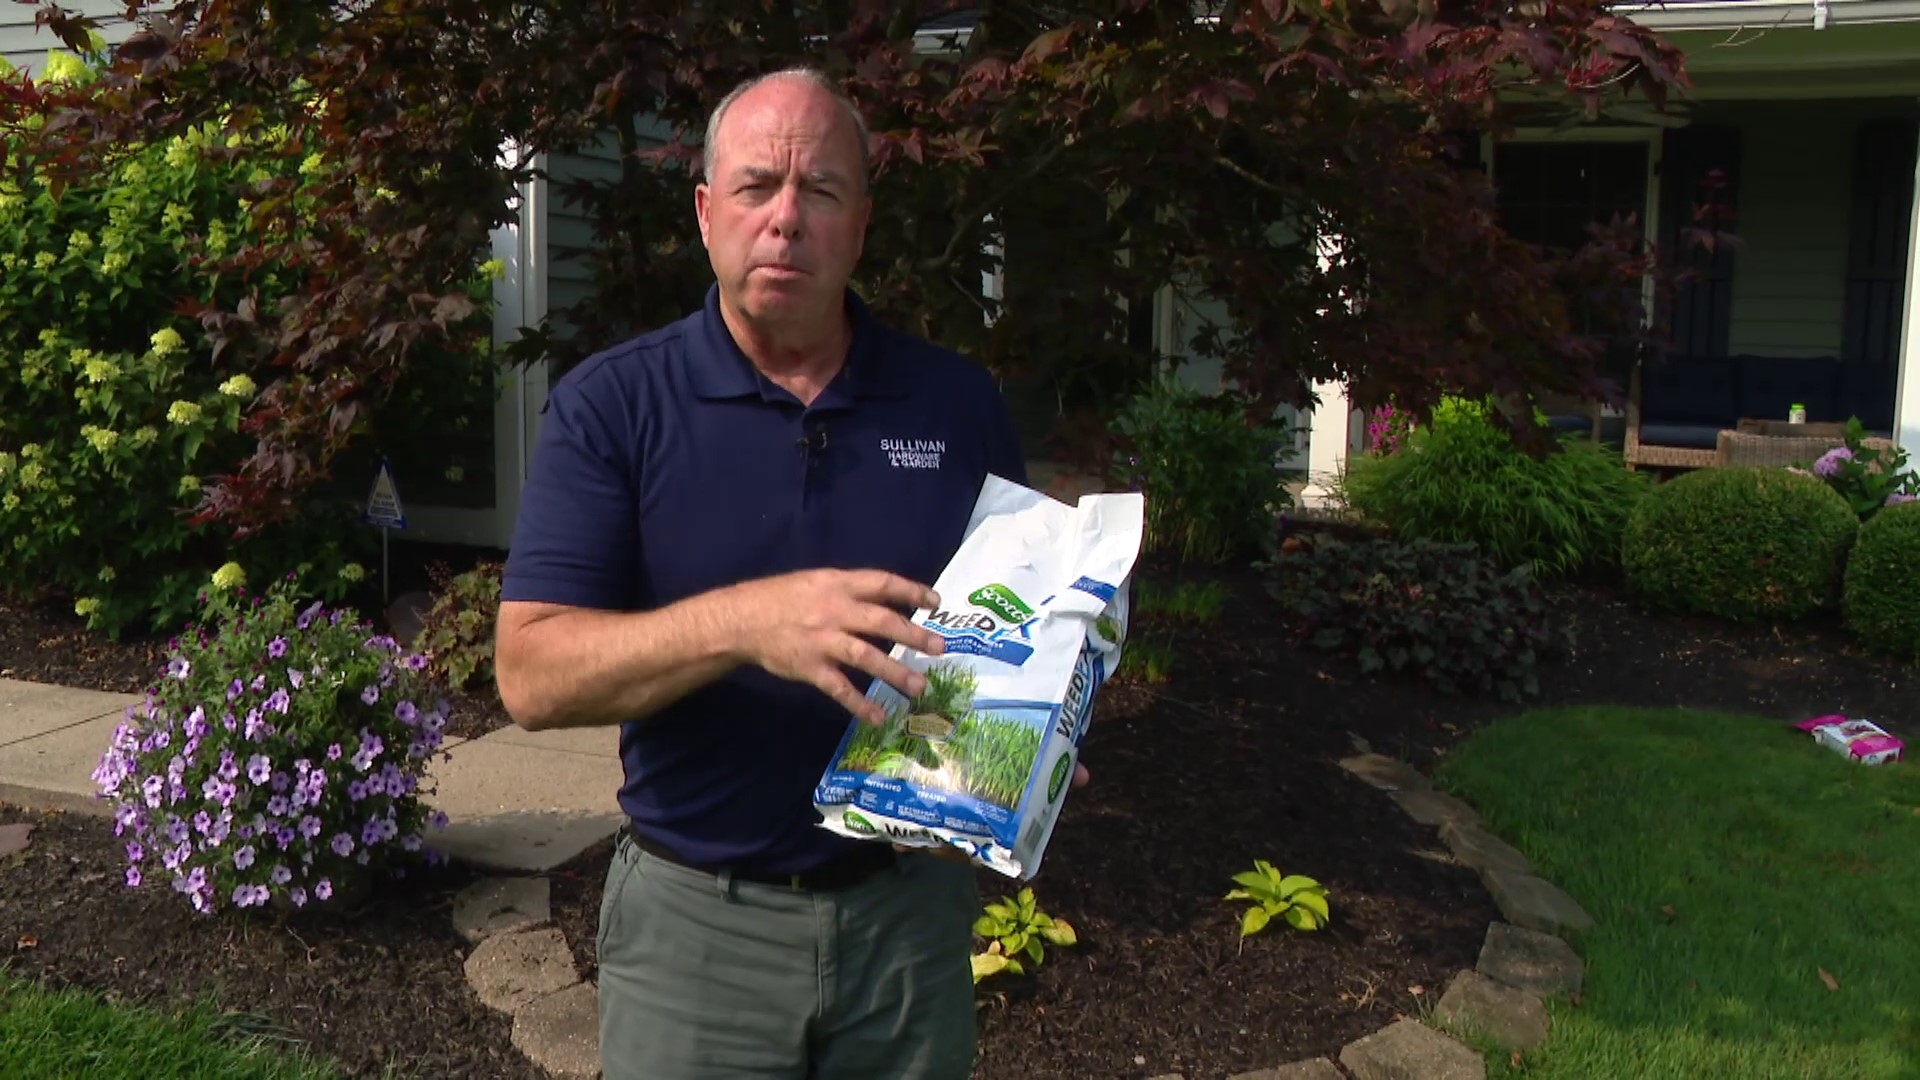 Pat Sullivan has tips on how to get your lawn ready for fall plus more home maintenance advice!